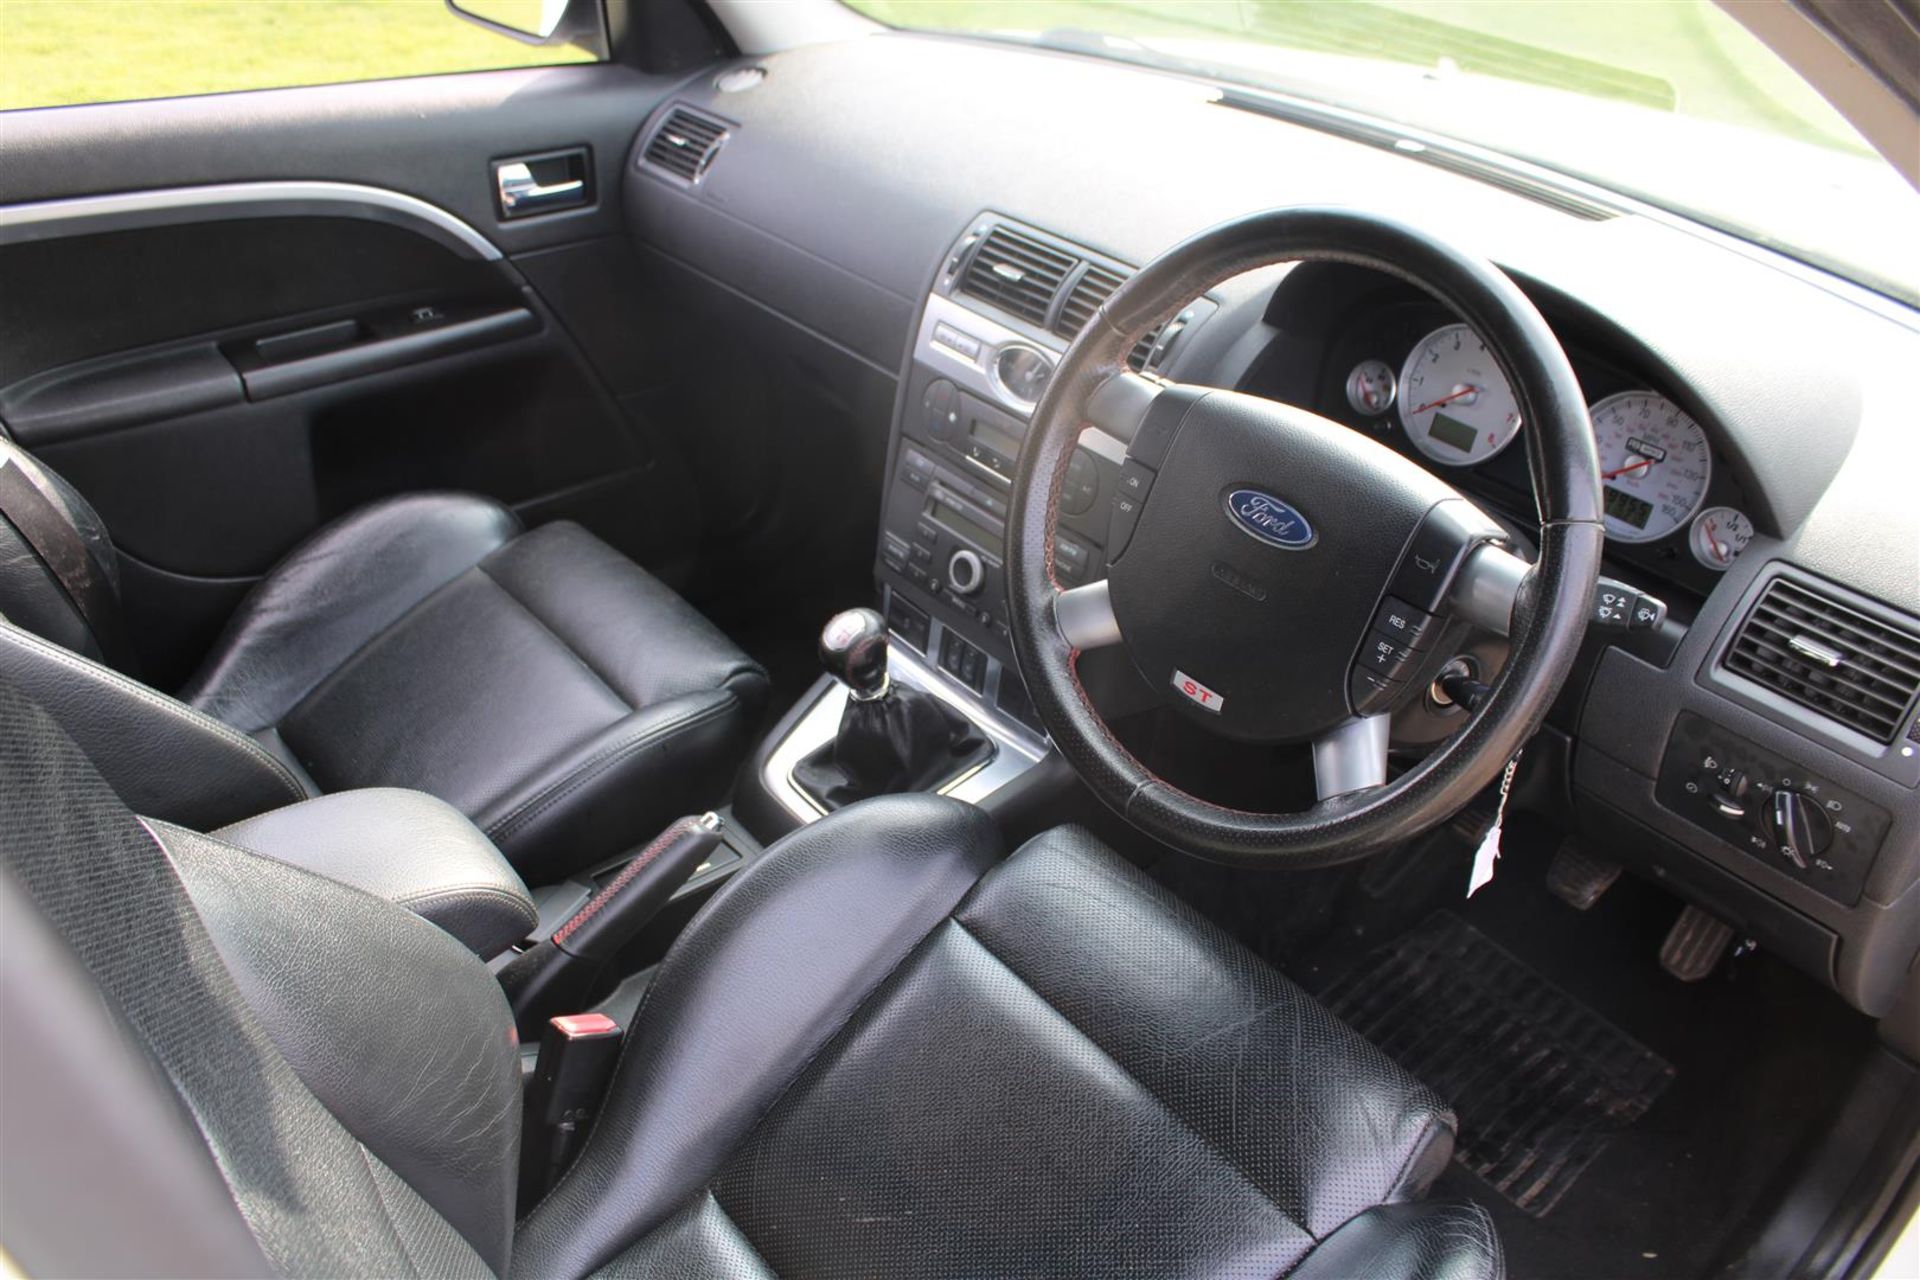 2005 Ford Mondeo ST220 Estate - Image 12 of 19